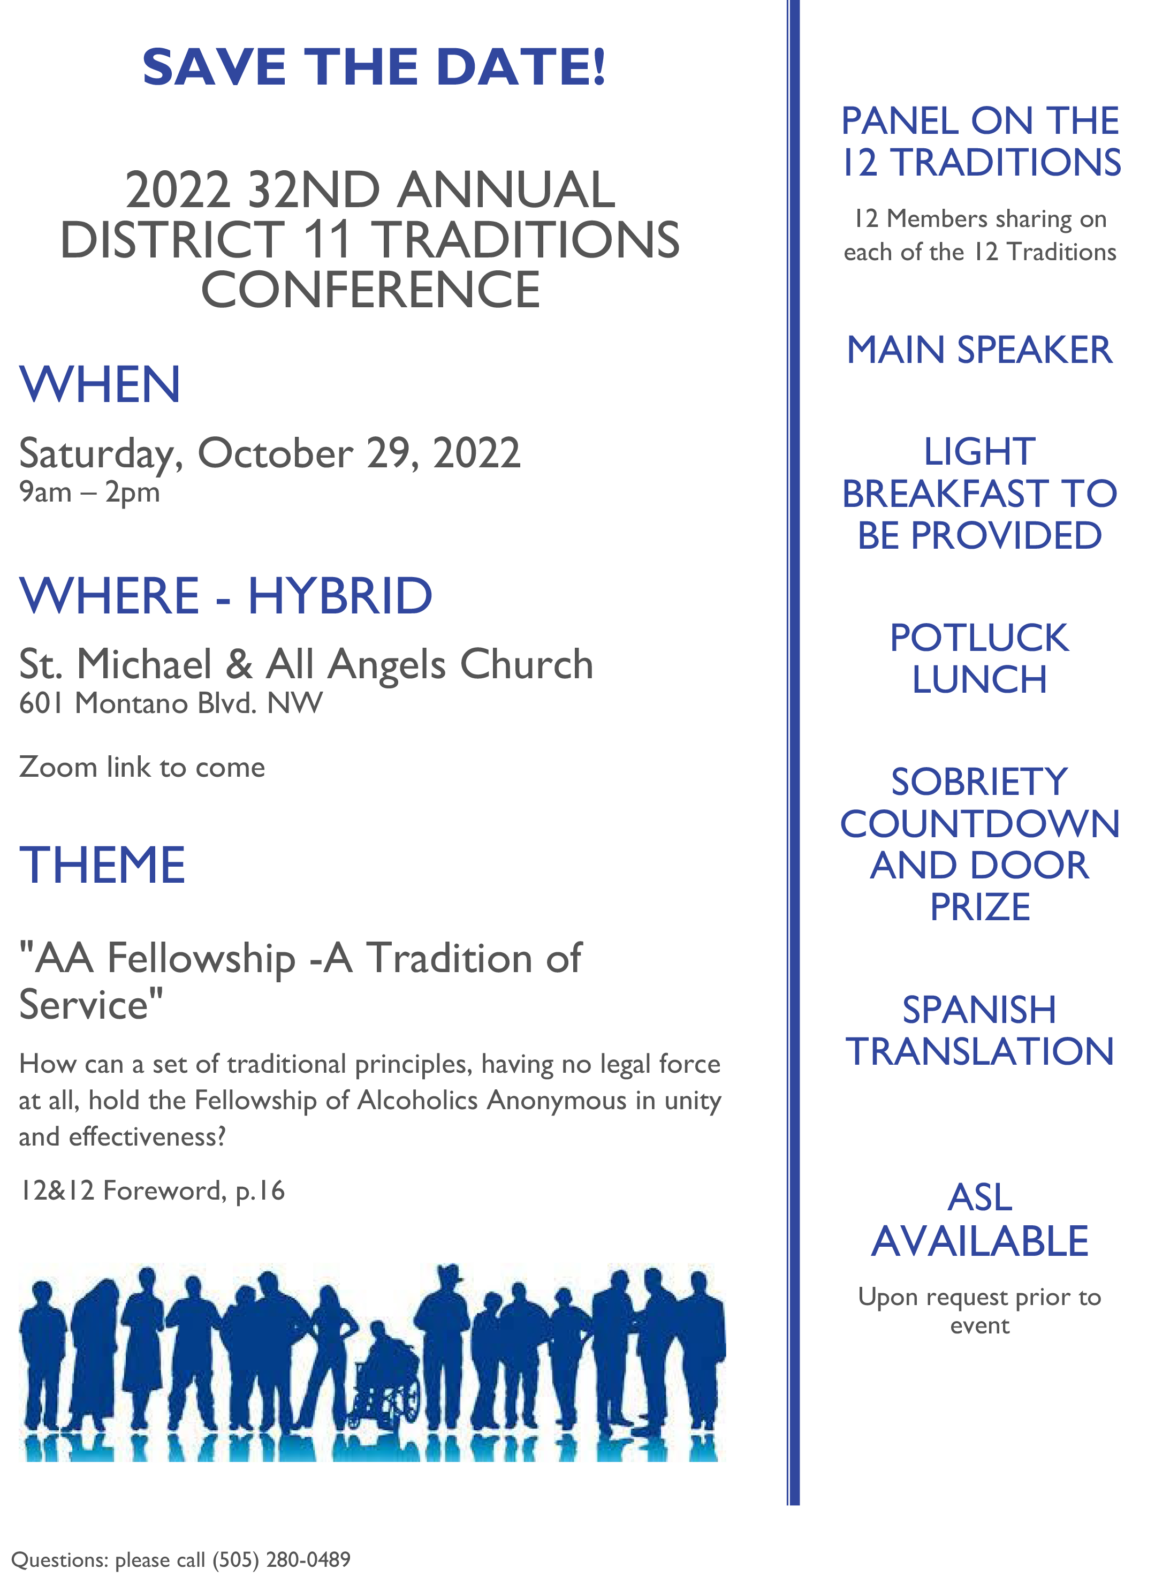 Oct. 29: Save the Date! 32nd Annual District 11 Traditions Conference